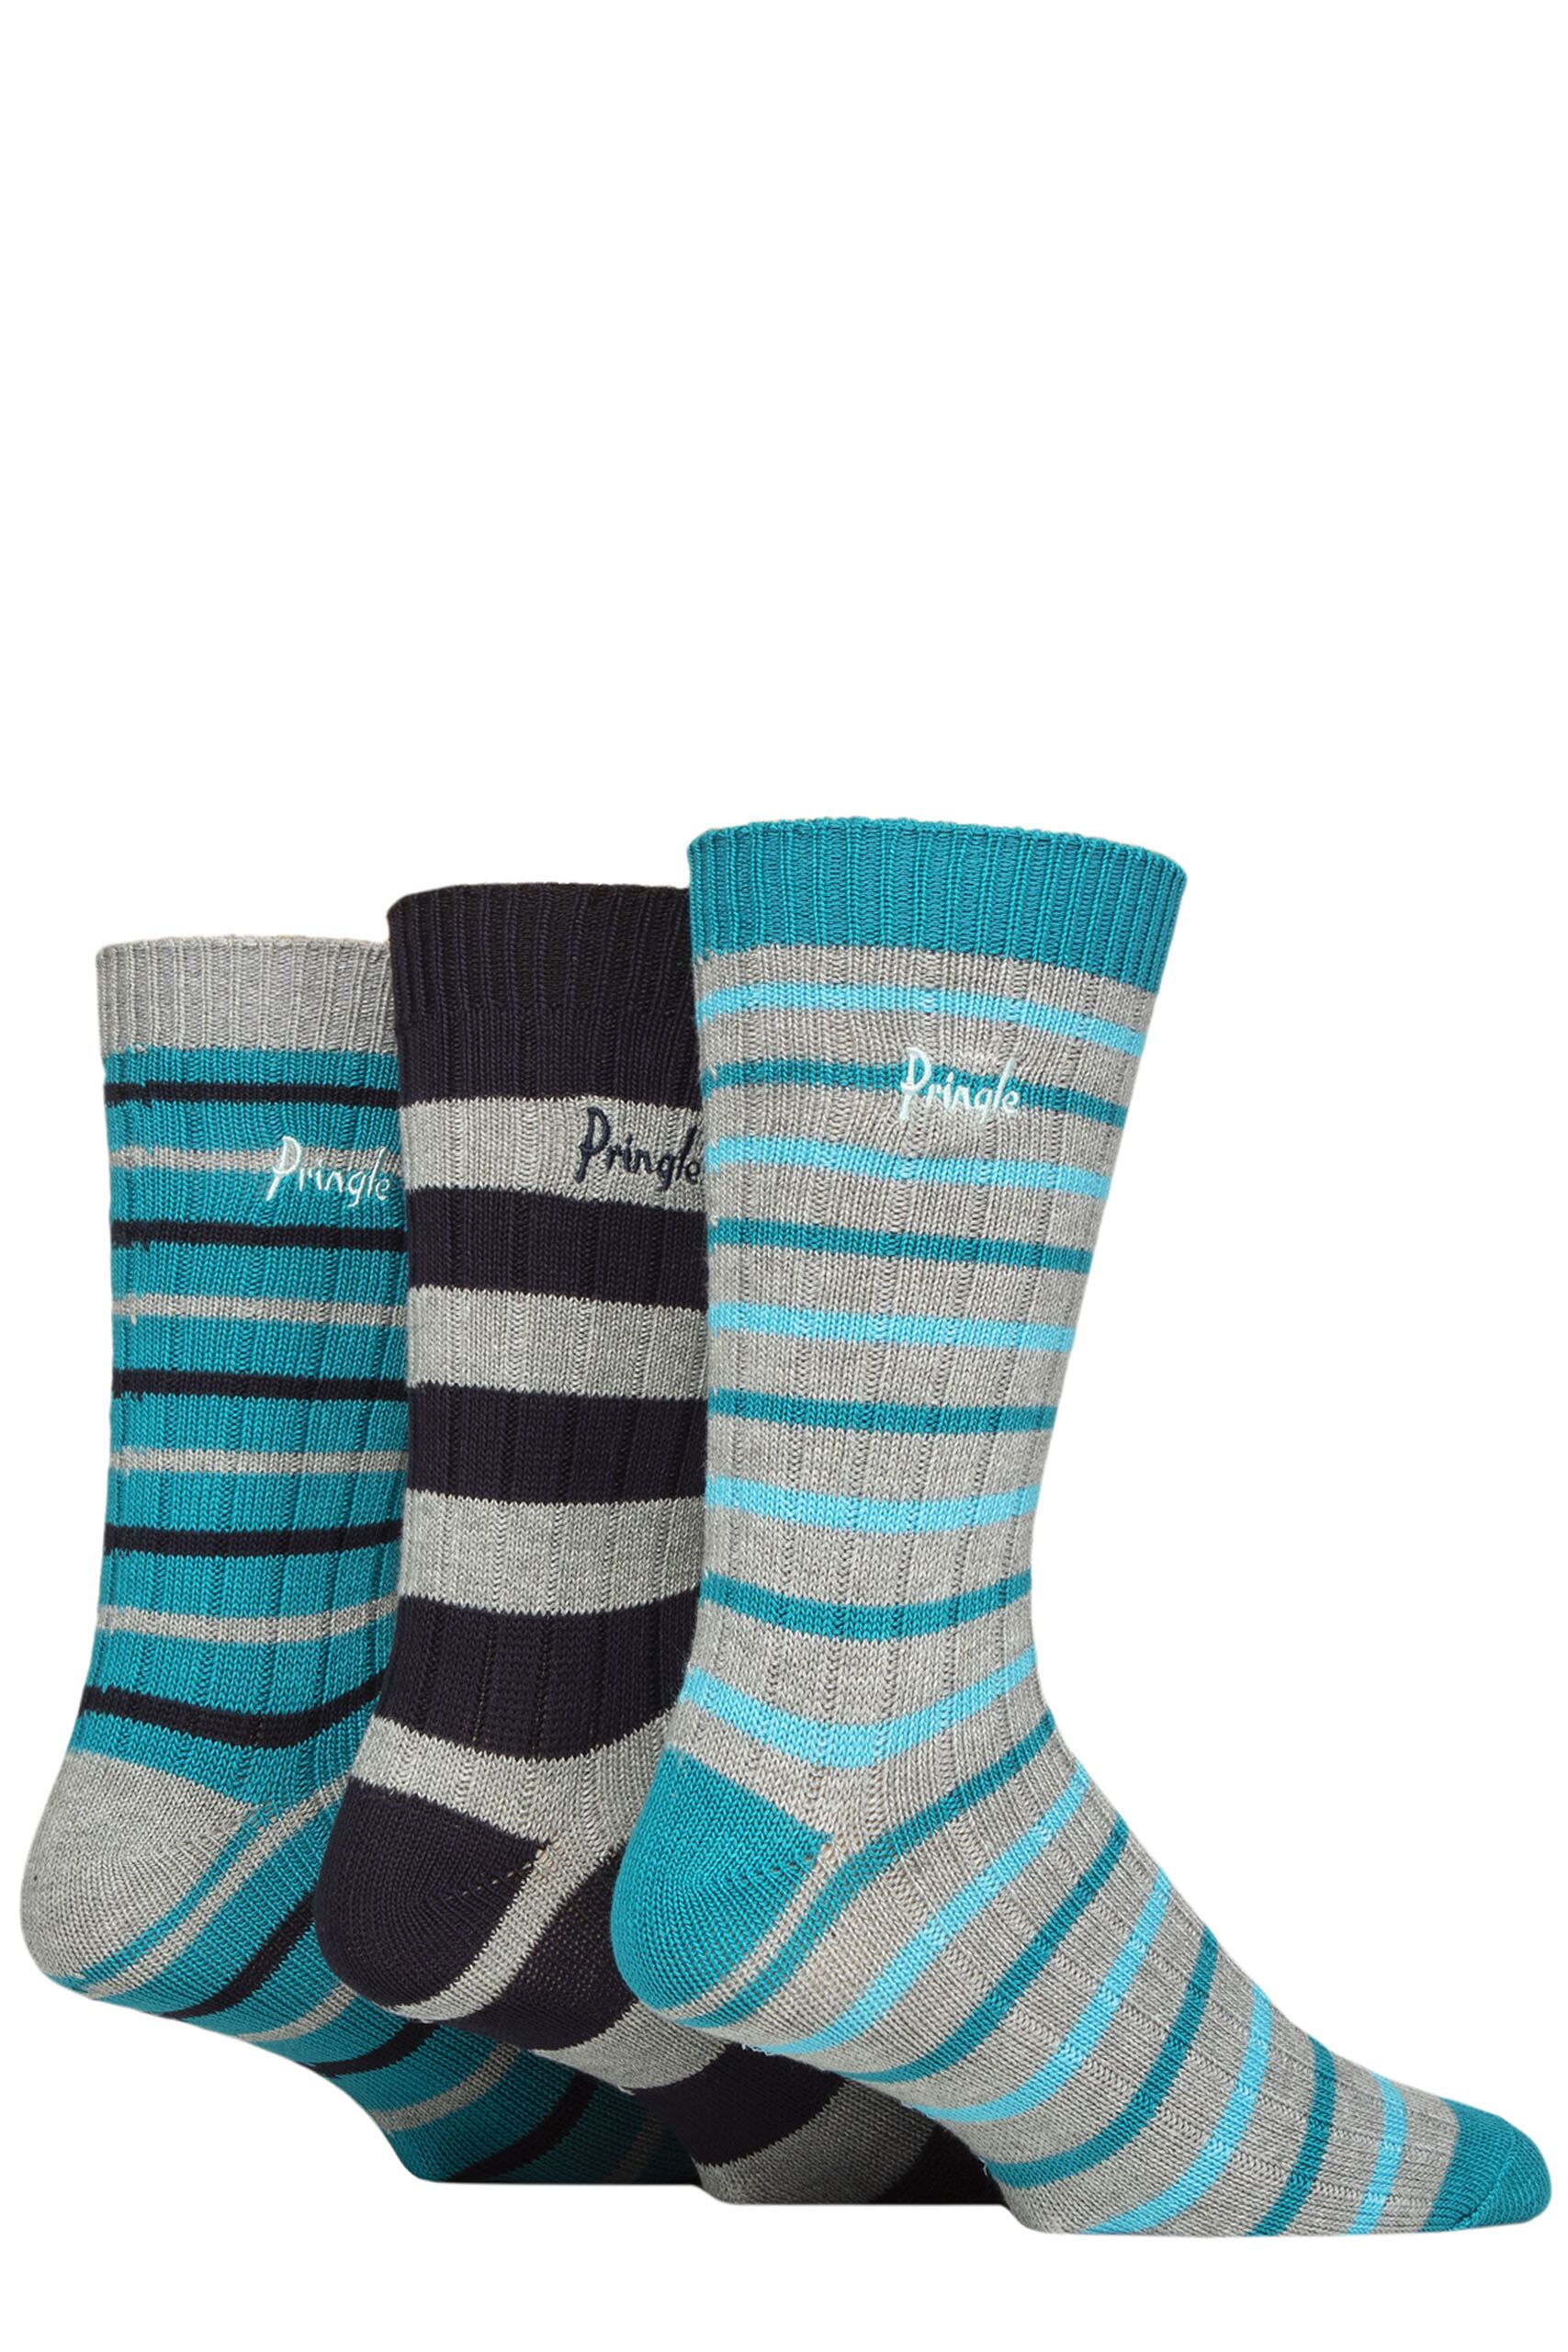 Small Stripes Grey / Teal